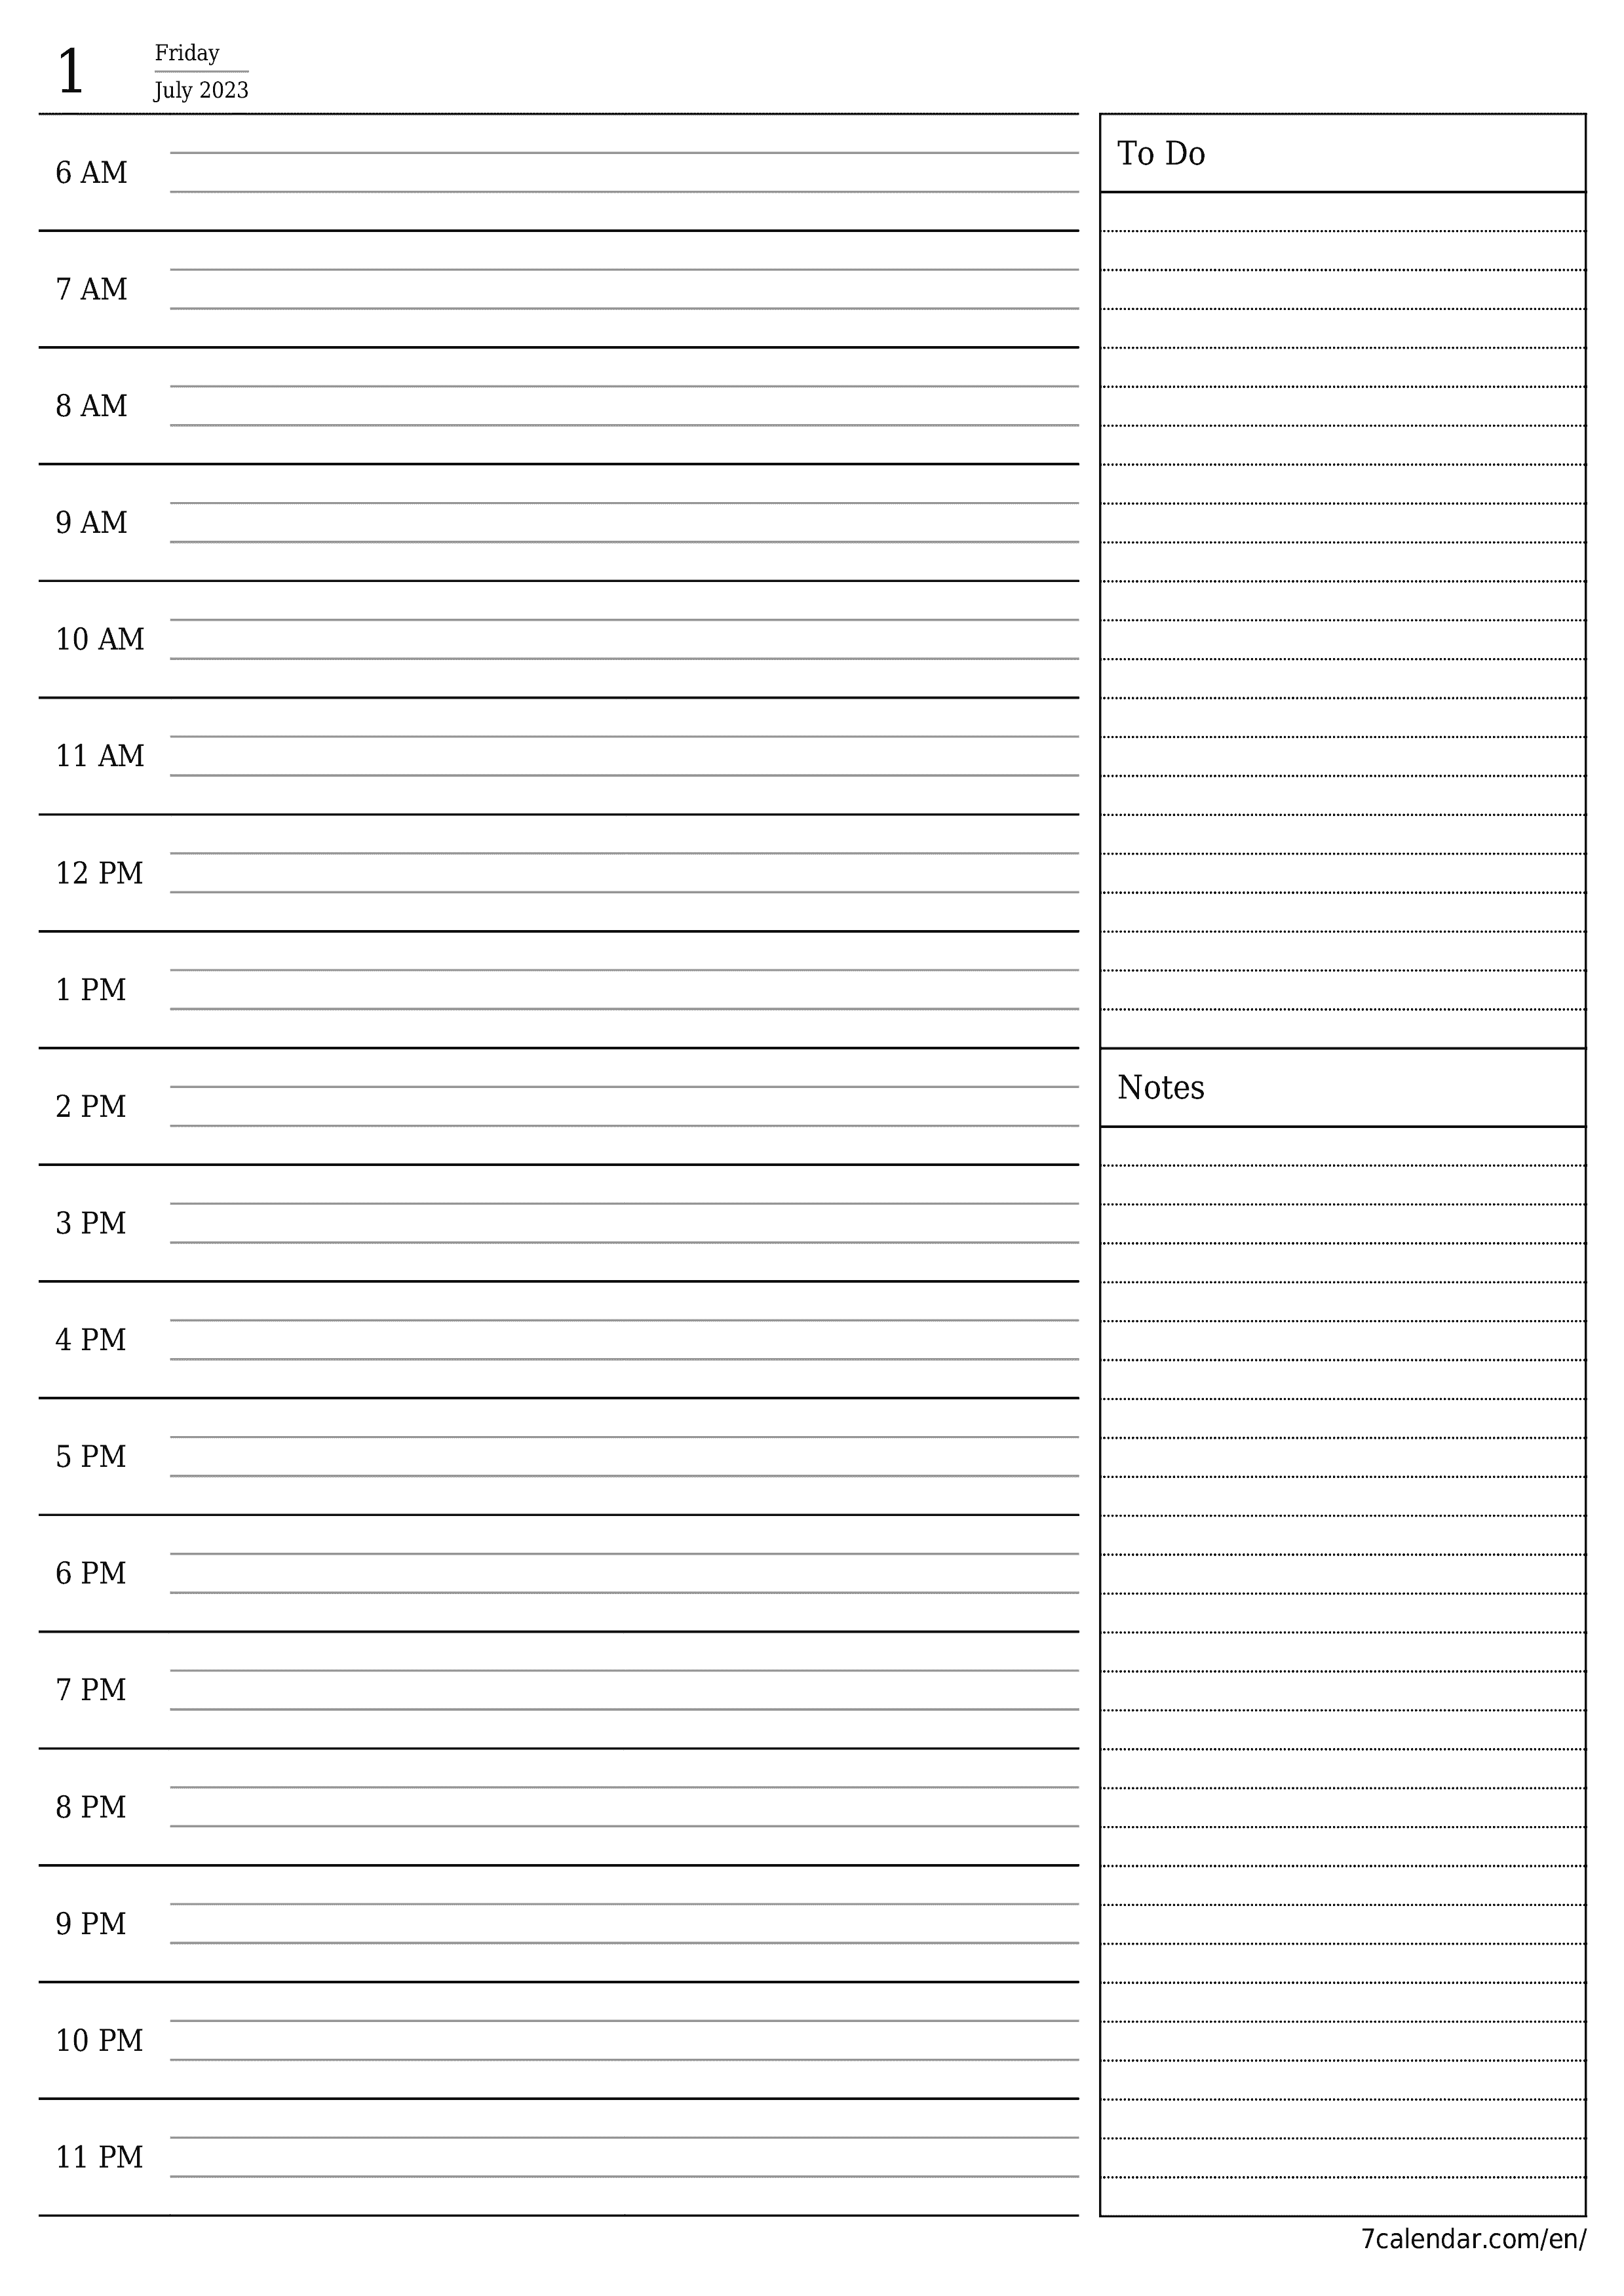 Blank daily printable calendar and planner for day July 2023 with notes, save and print to PDF PNG English - 7calendar.com